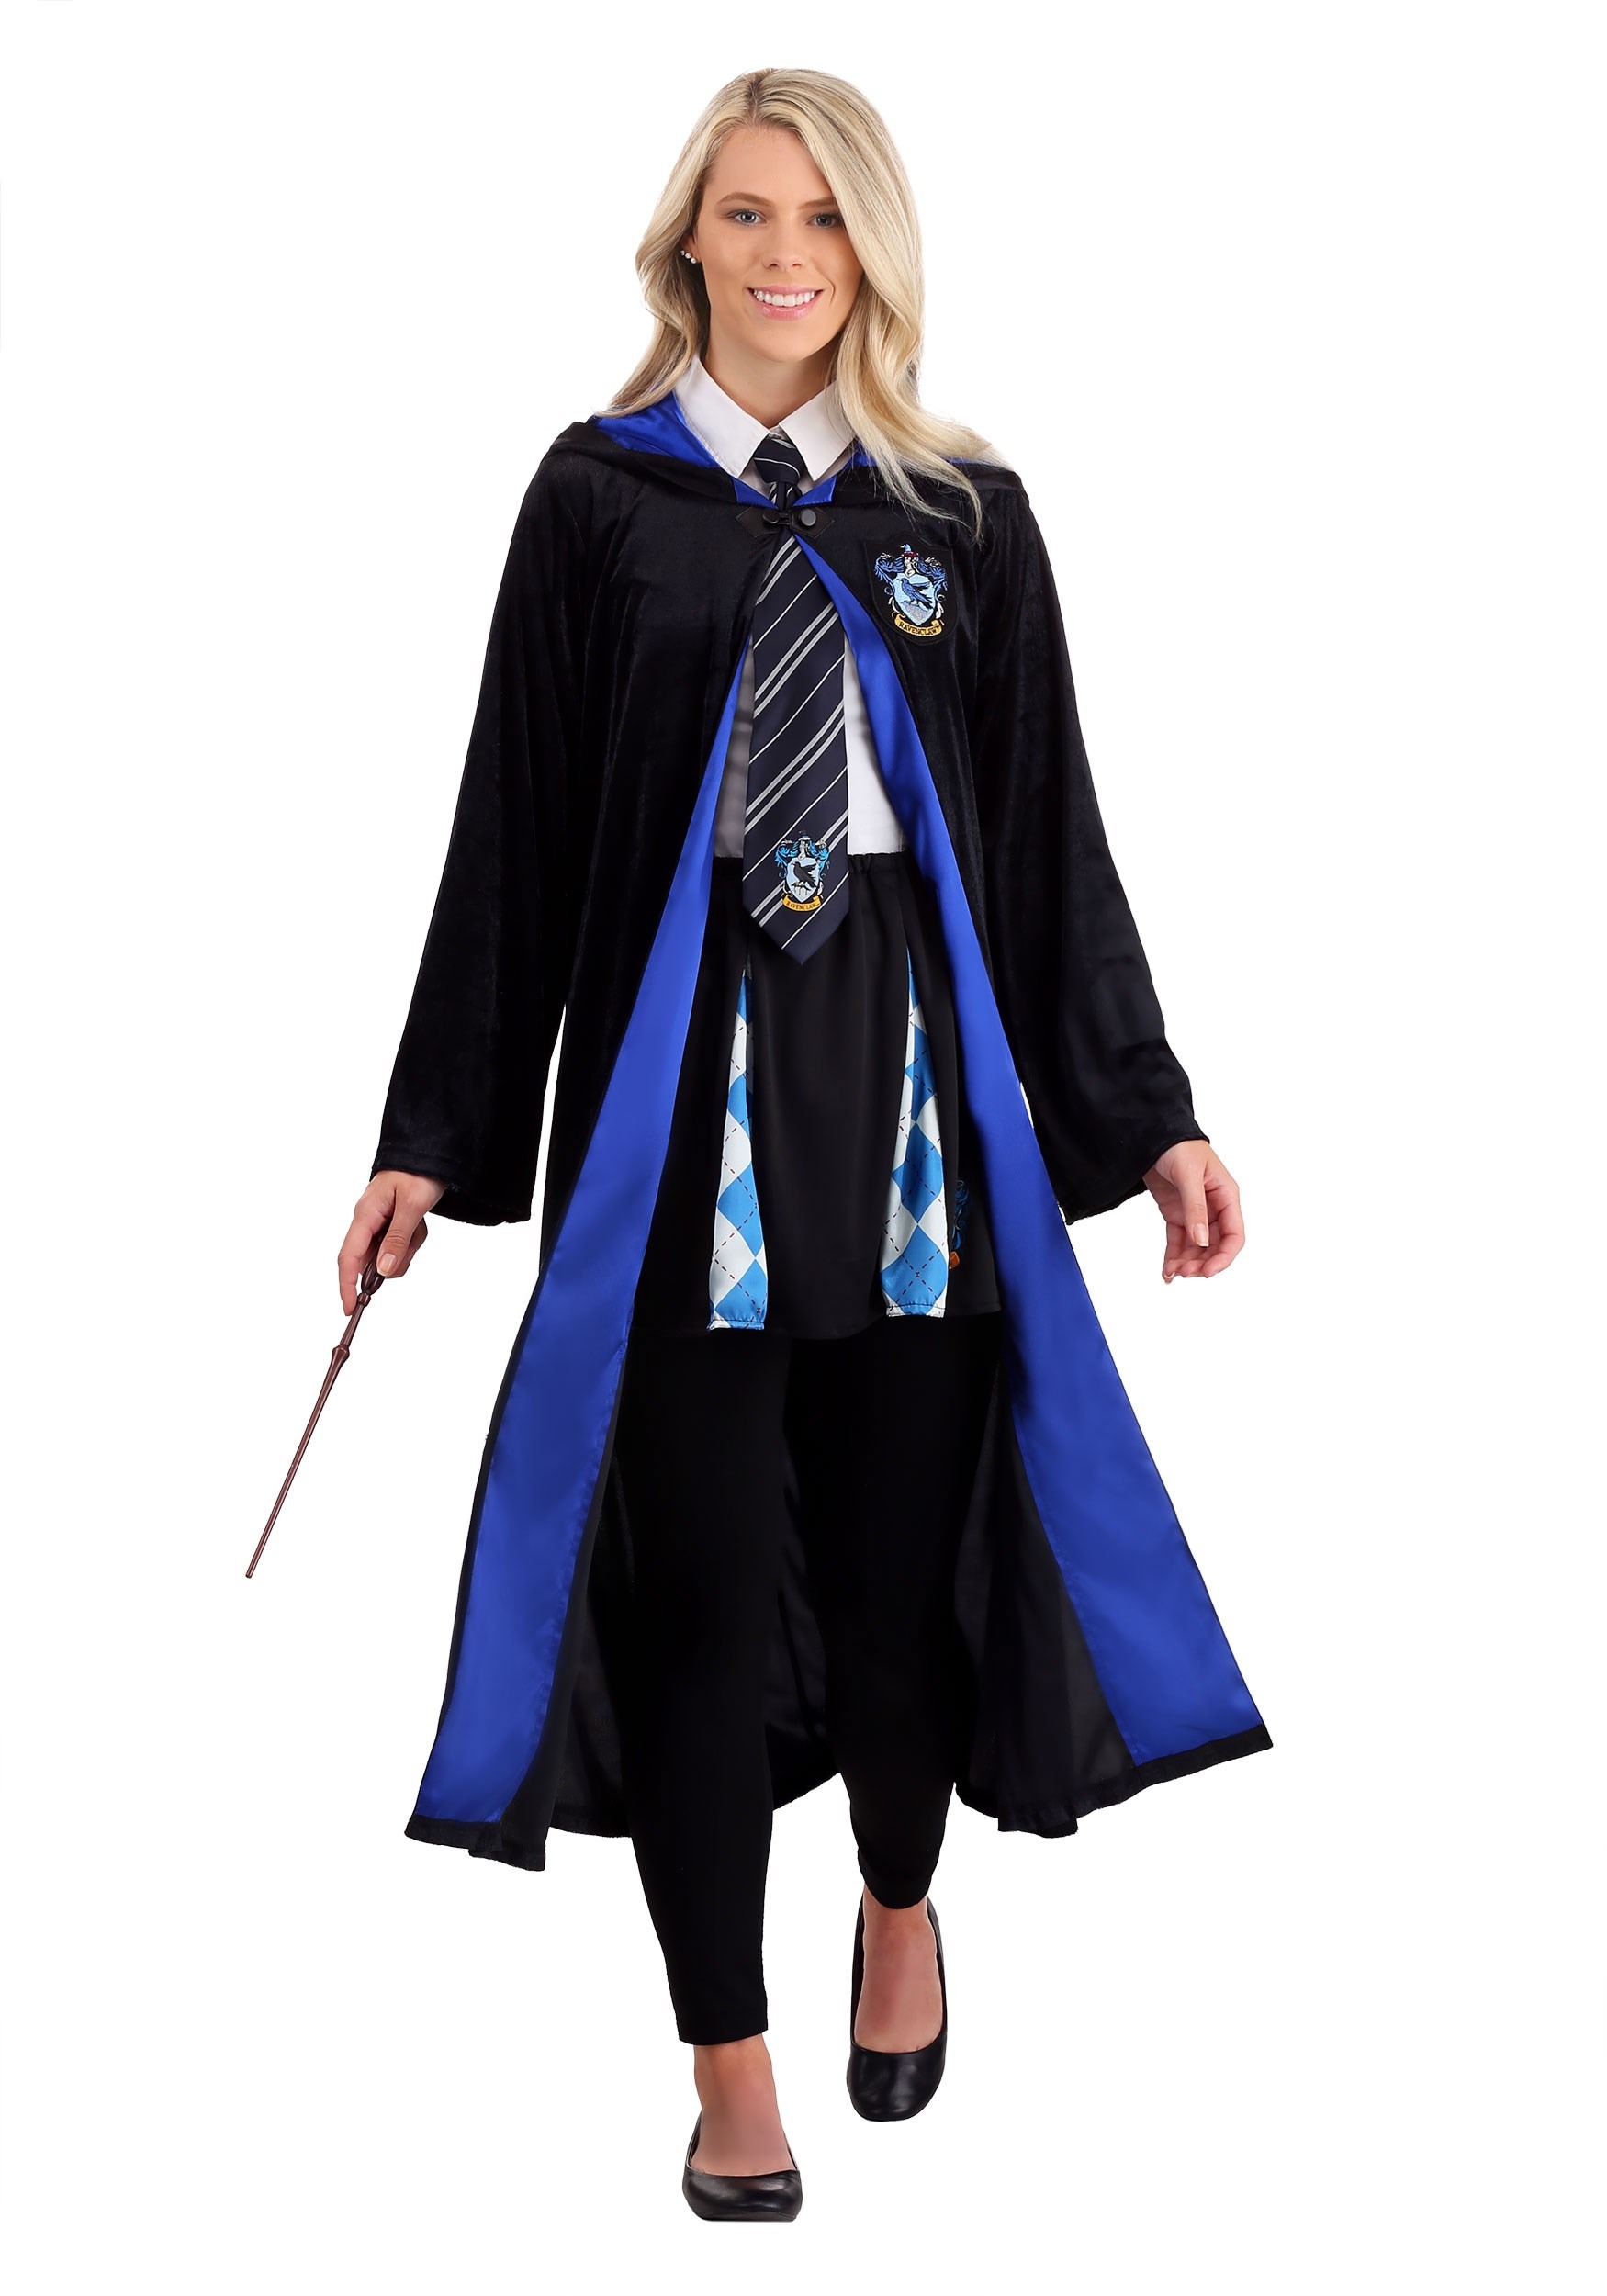 Ravenclaw cosplay